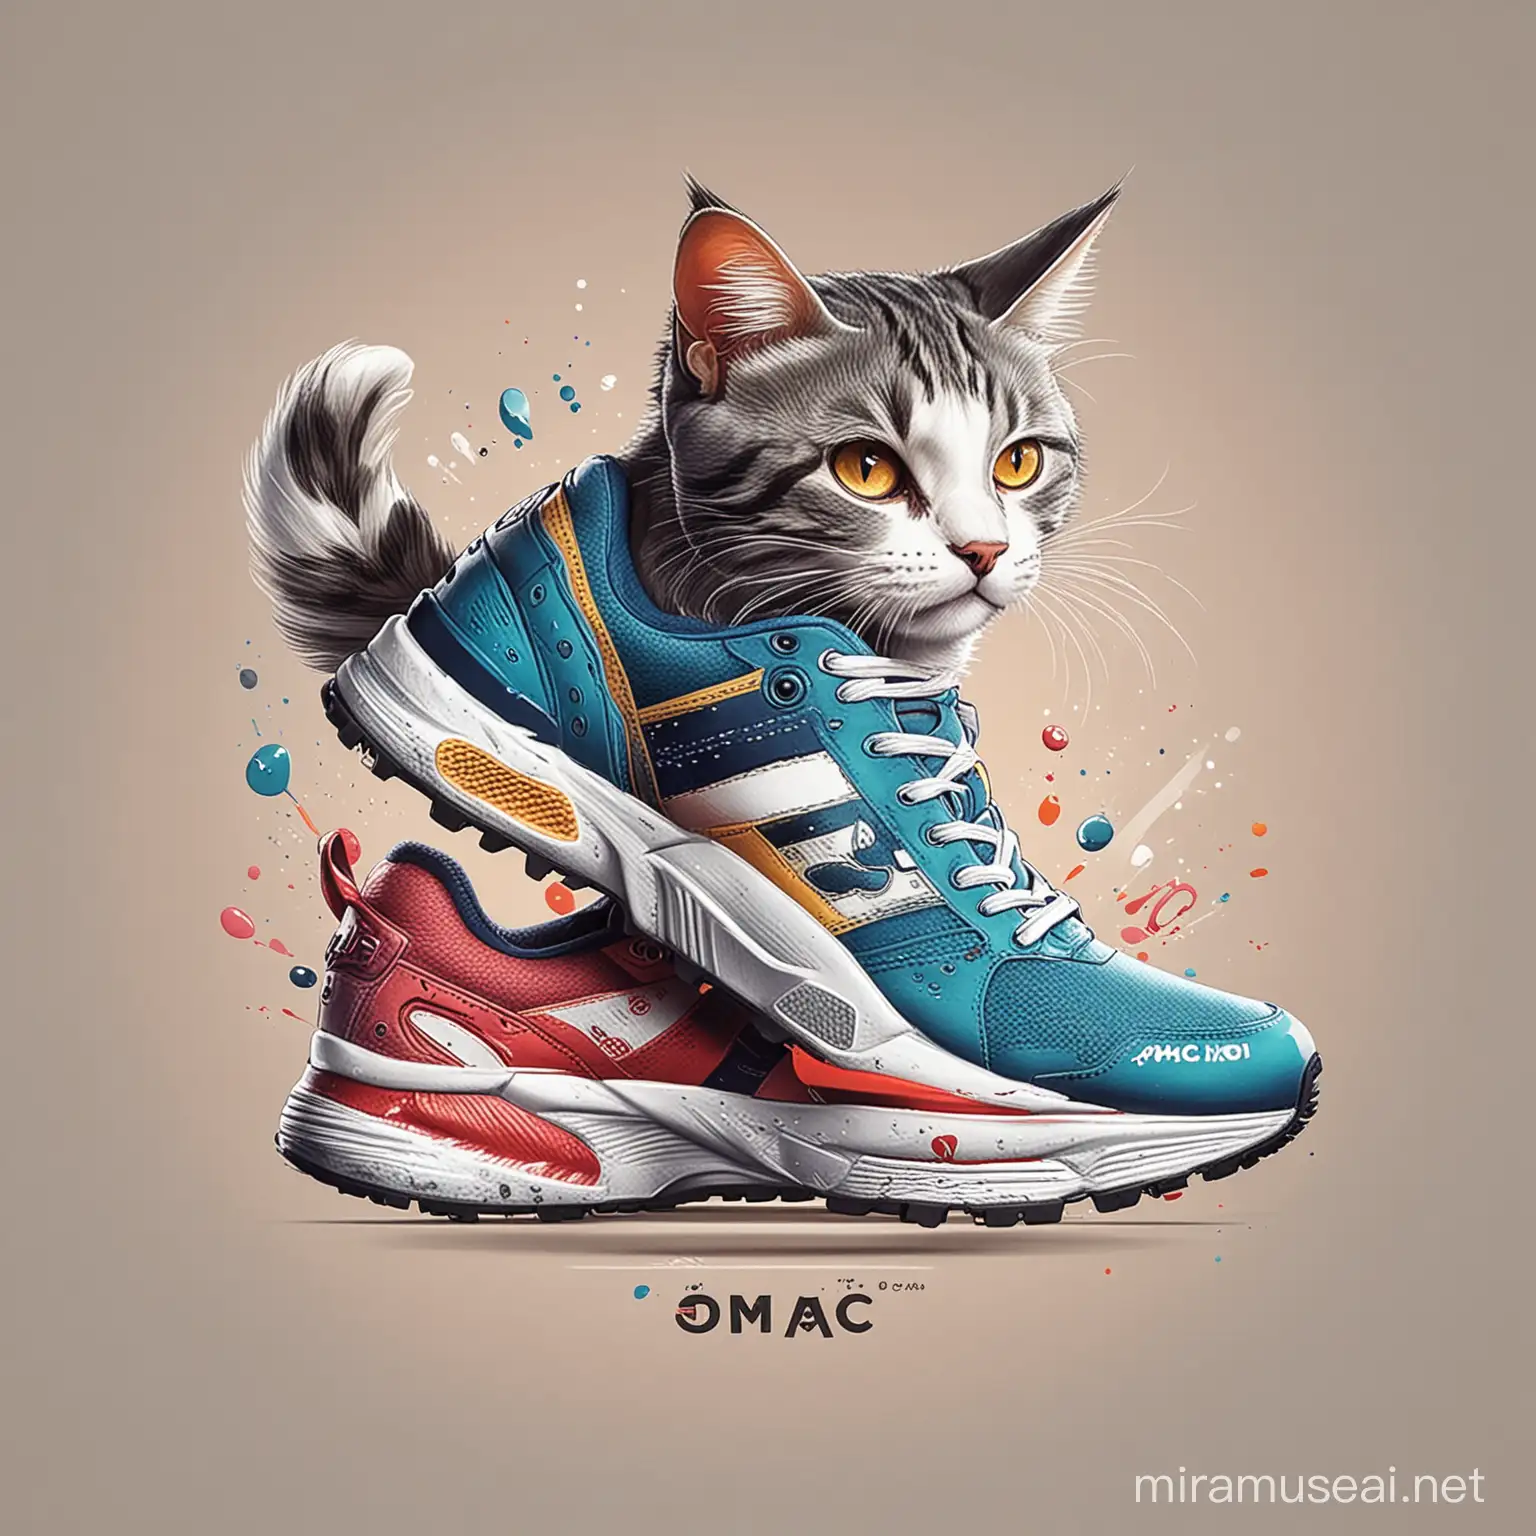 color full drawing like vector,cat with caps,running shoes ,shoe brand name OMAC